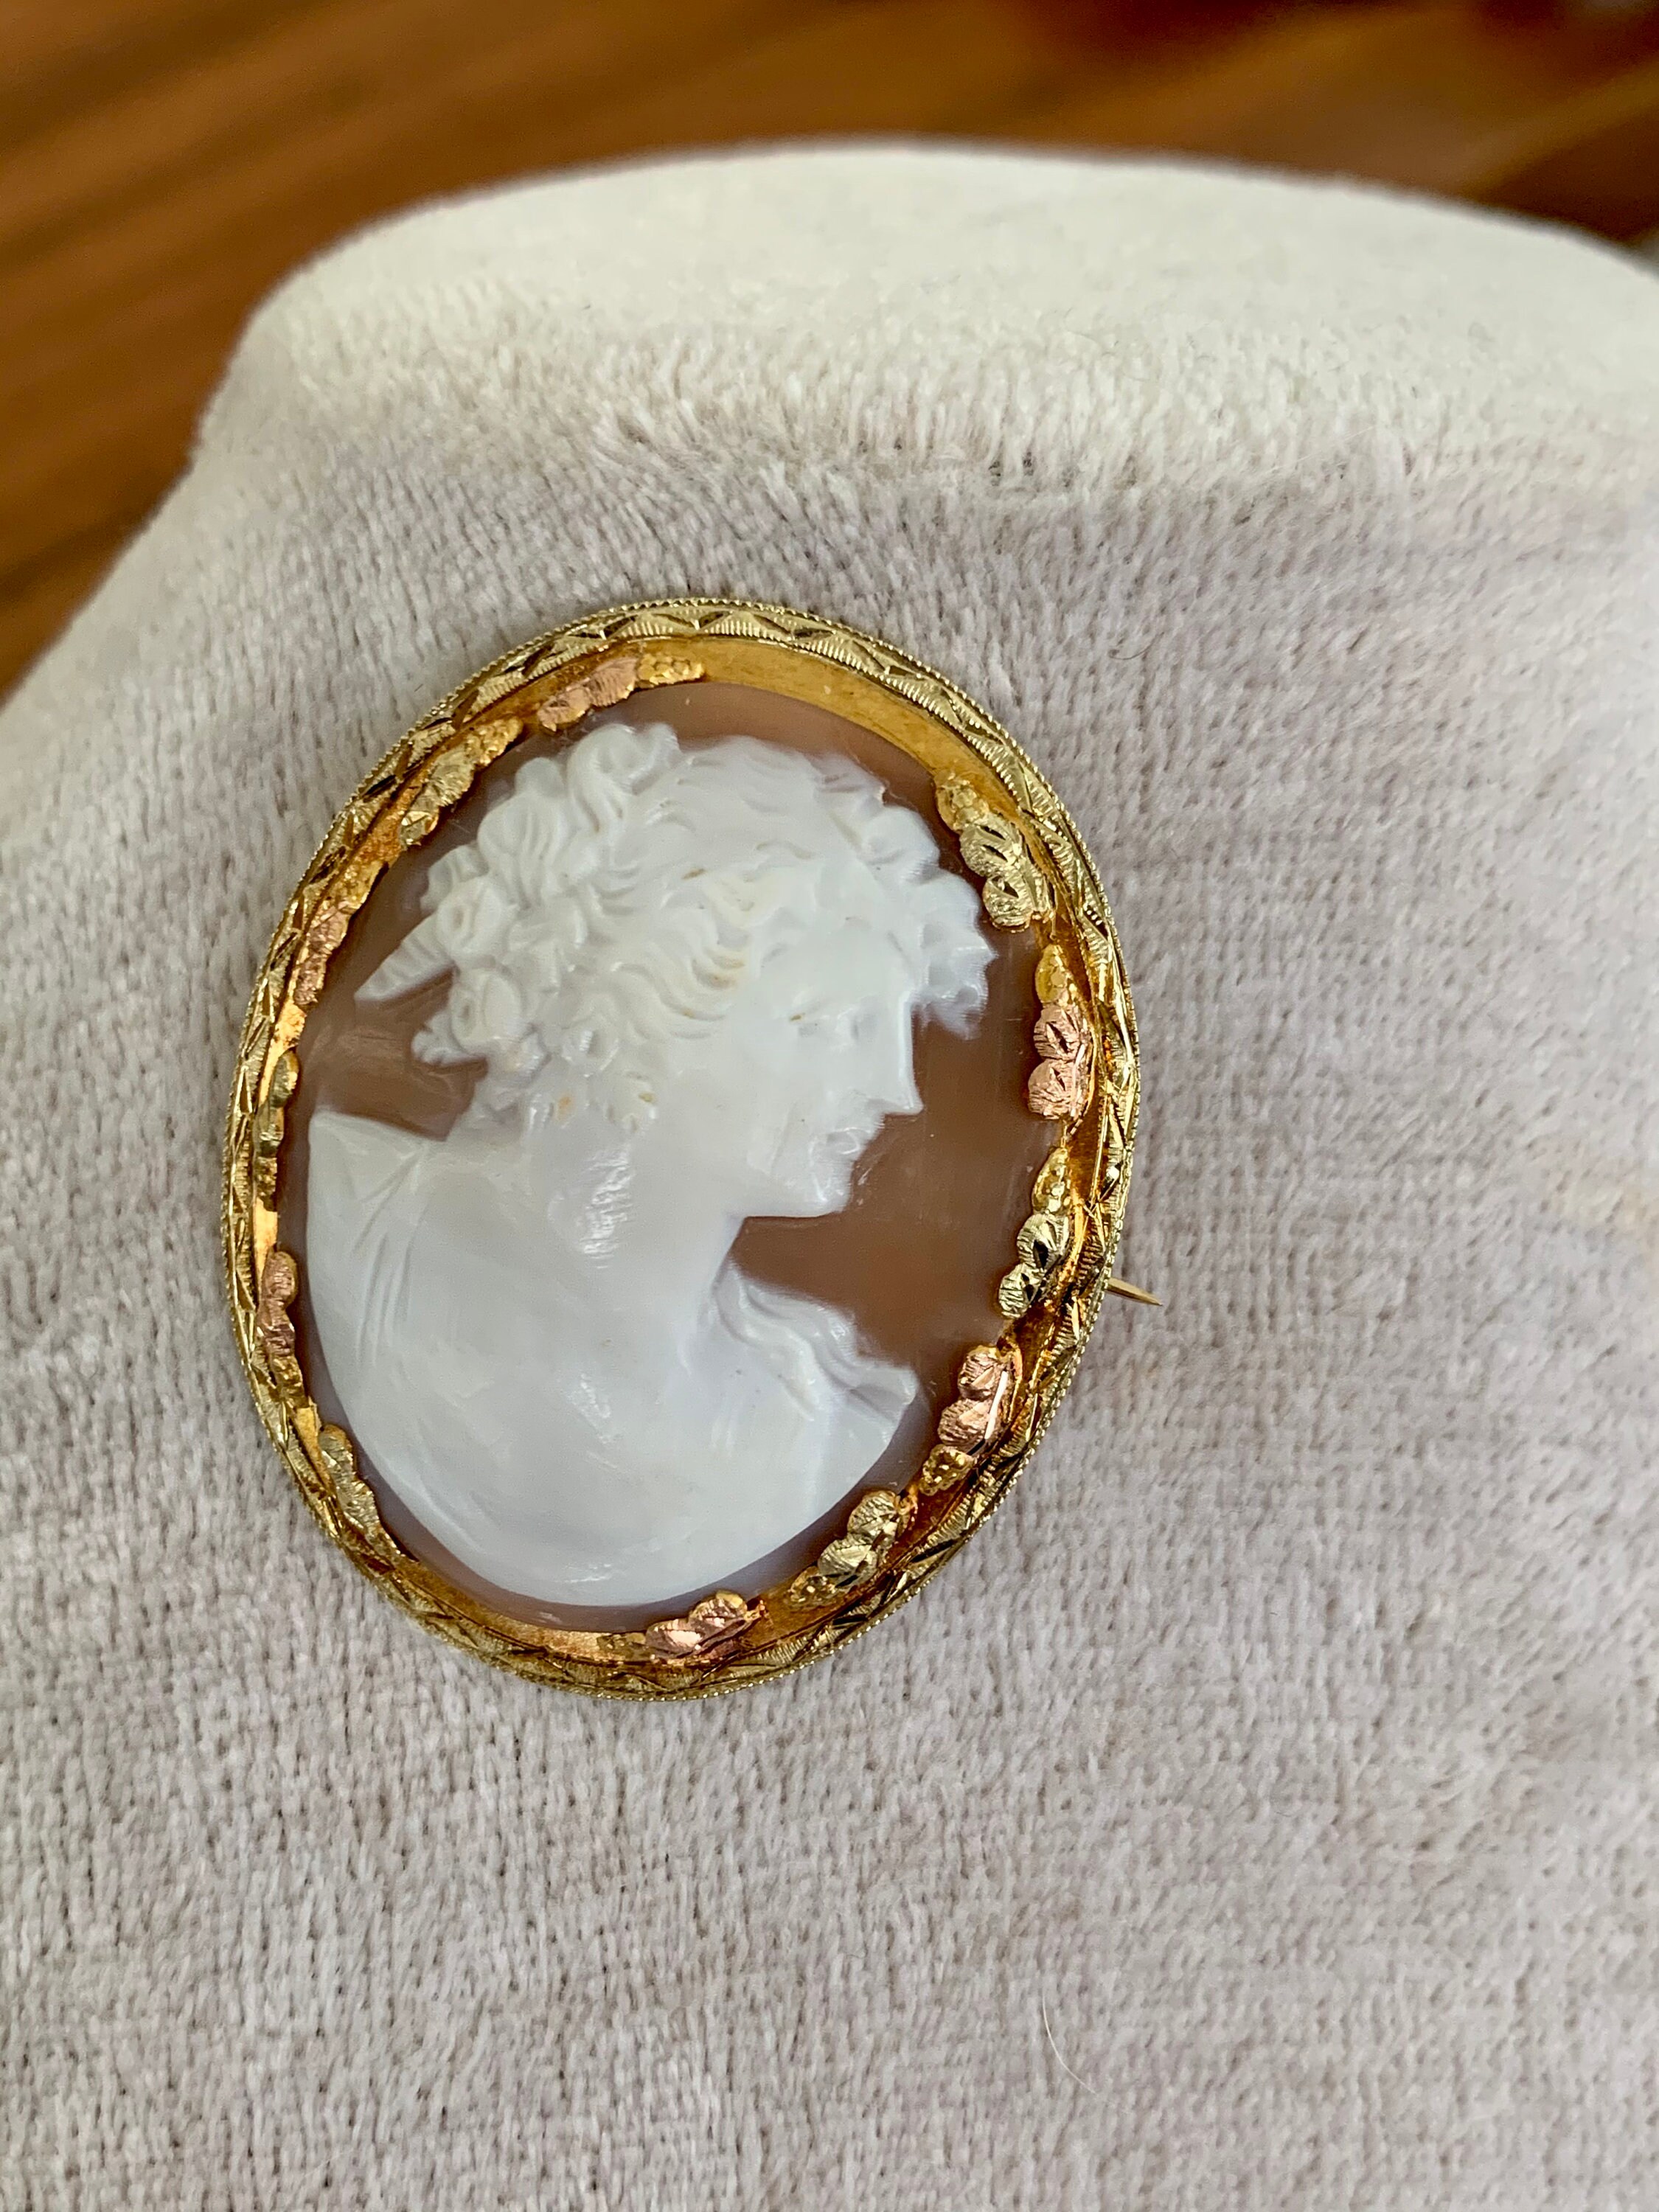 Vintage Cameo 10 Karat Yellow and Rose Gold Brooch | Etsy